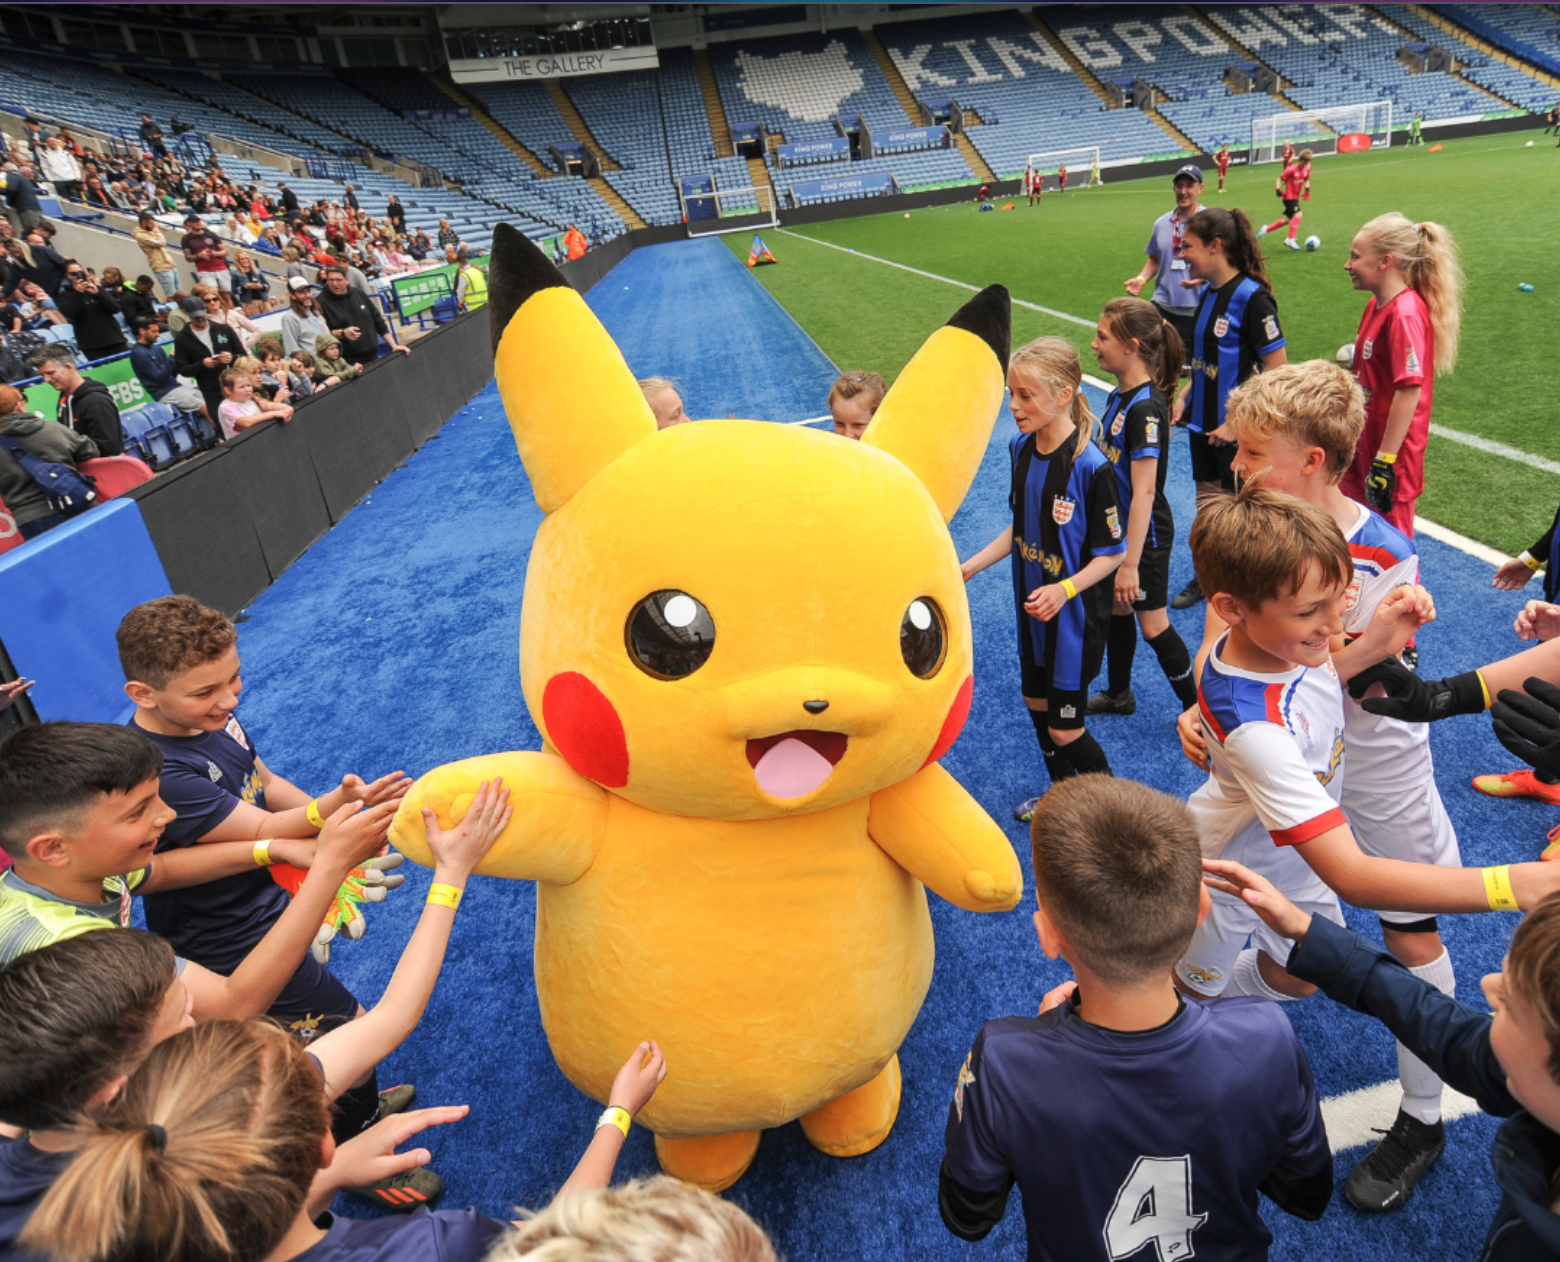 Pikachu with ESFA players in the 22/23 season